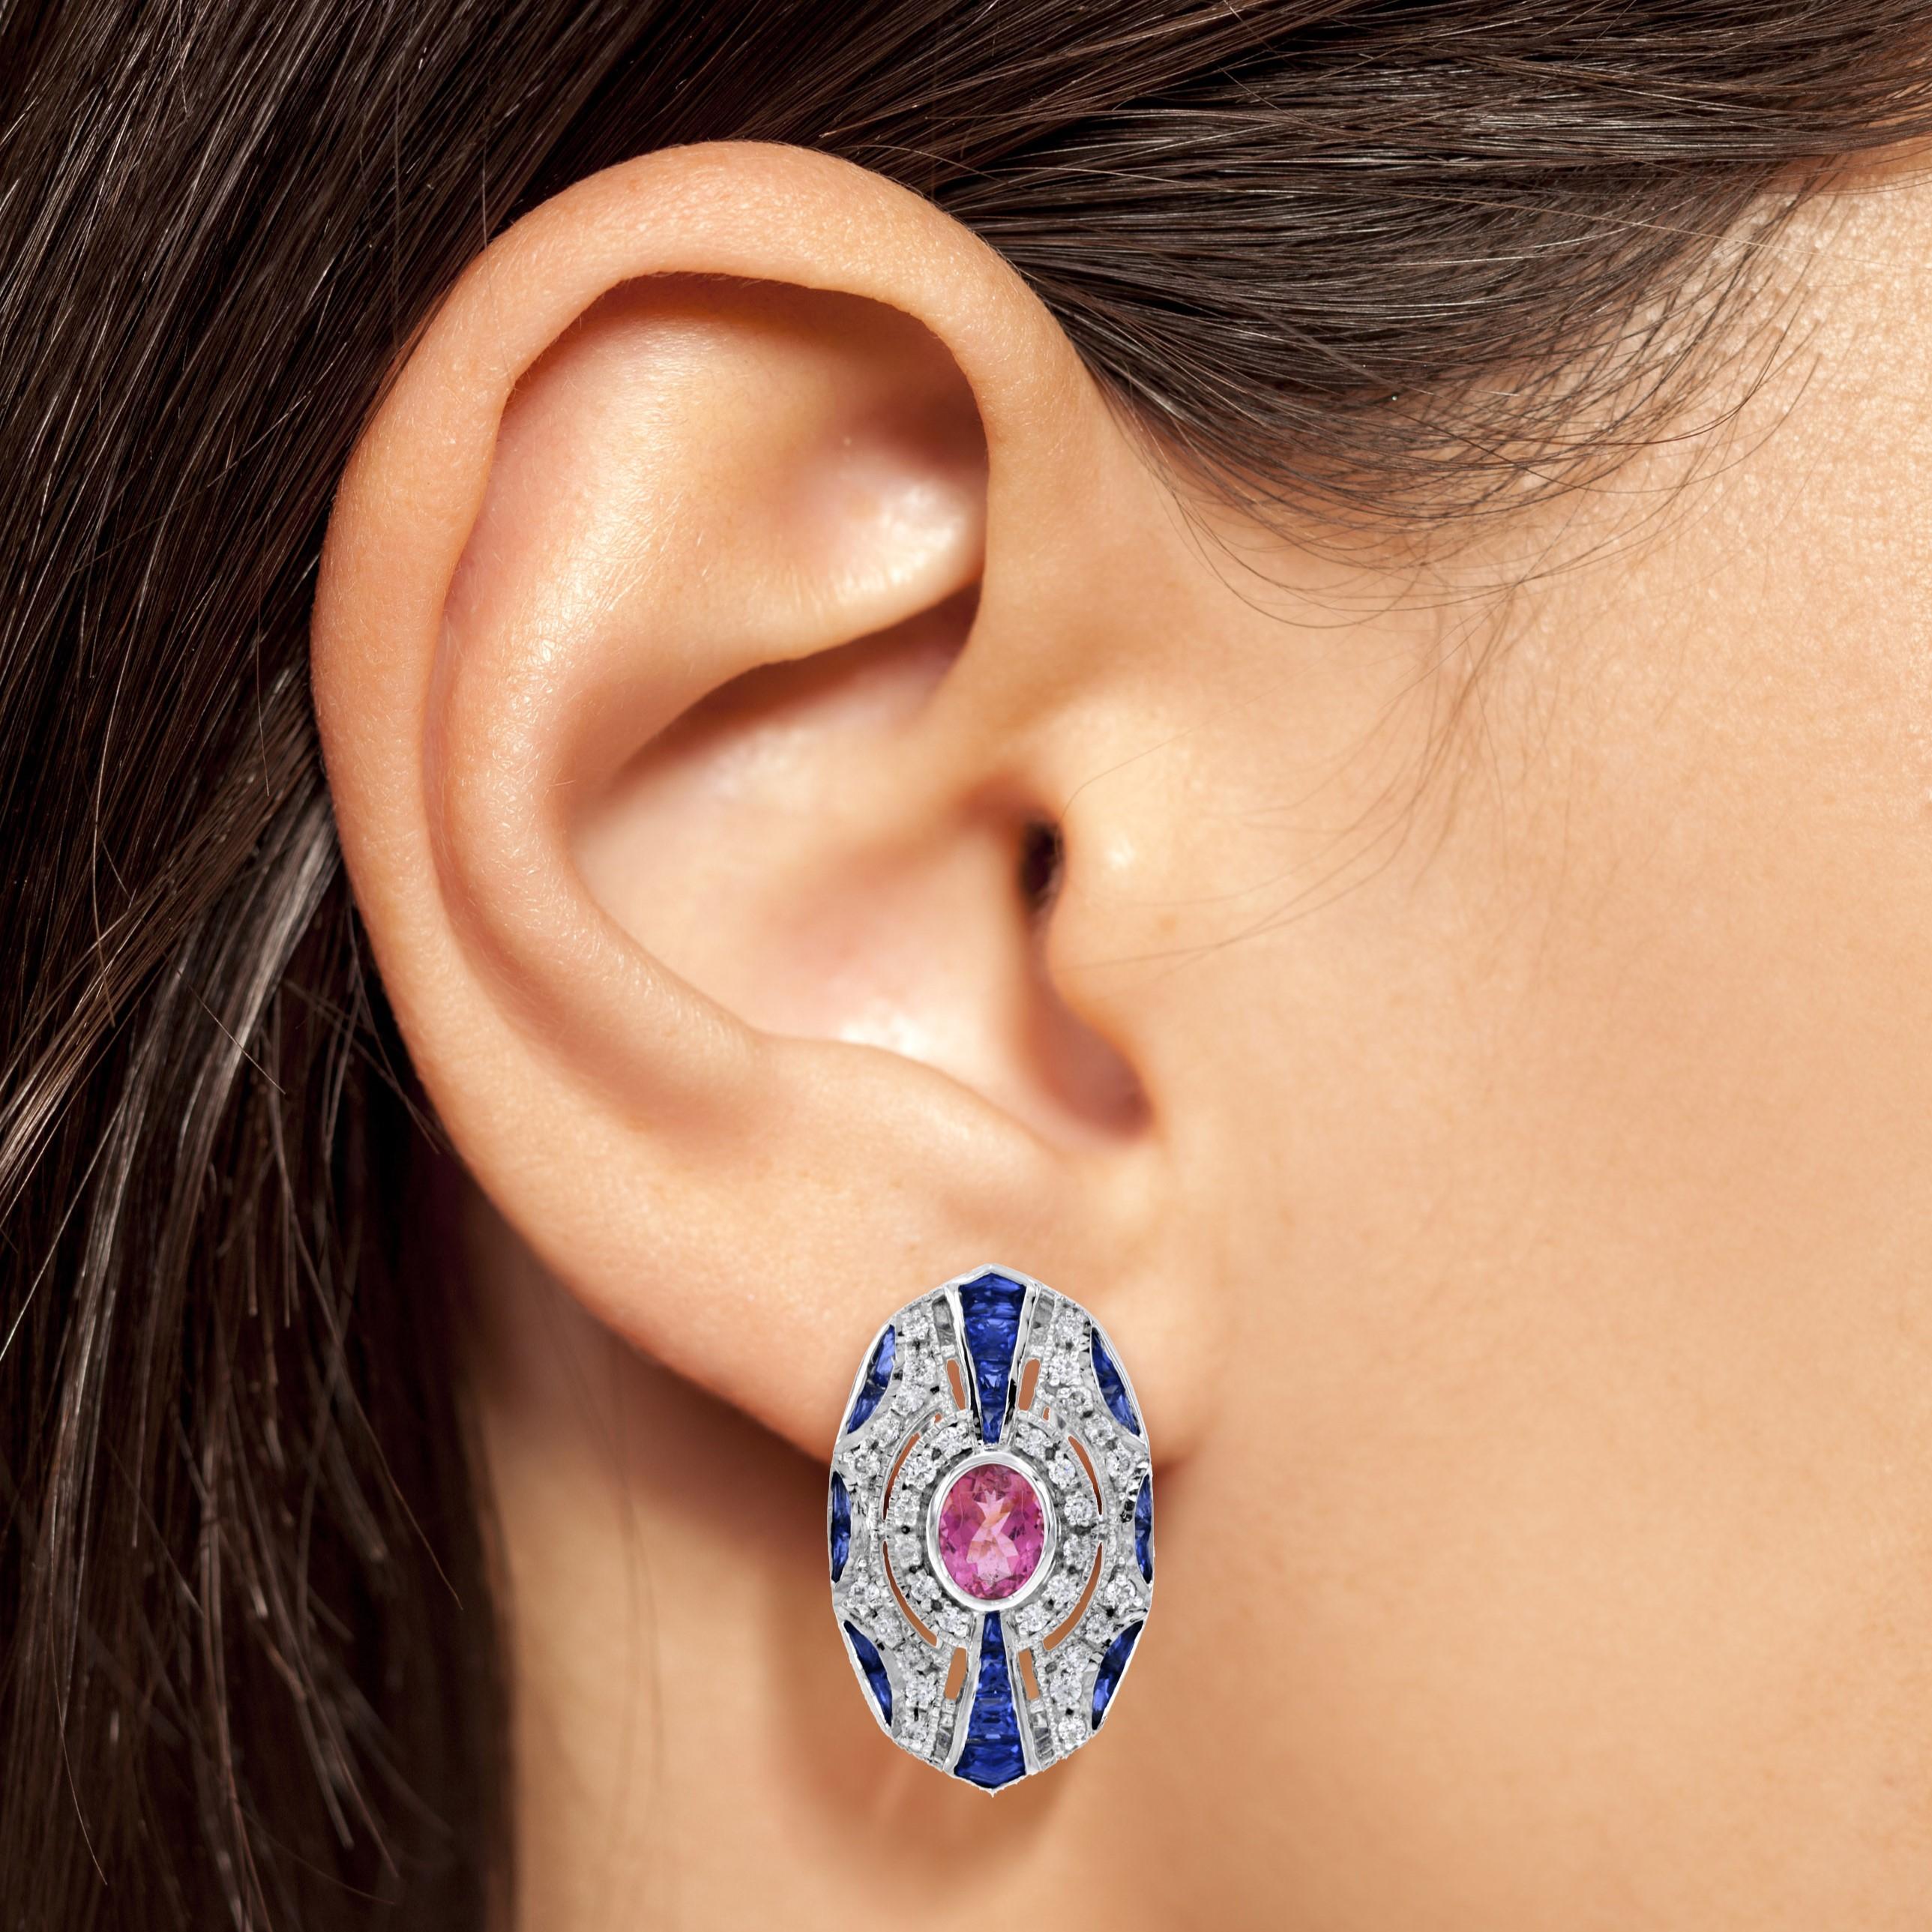 A pink tourmaline, weighing approx. 1.10 carats each side, glistens and glows in the center of geometrically constructed Art Deco style omega back earrings. The gemstone is surrounded by round diamonds and French cut sapphires accented with